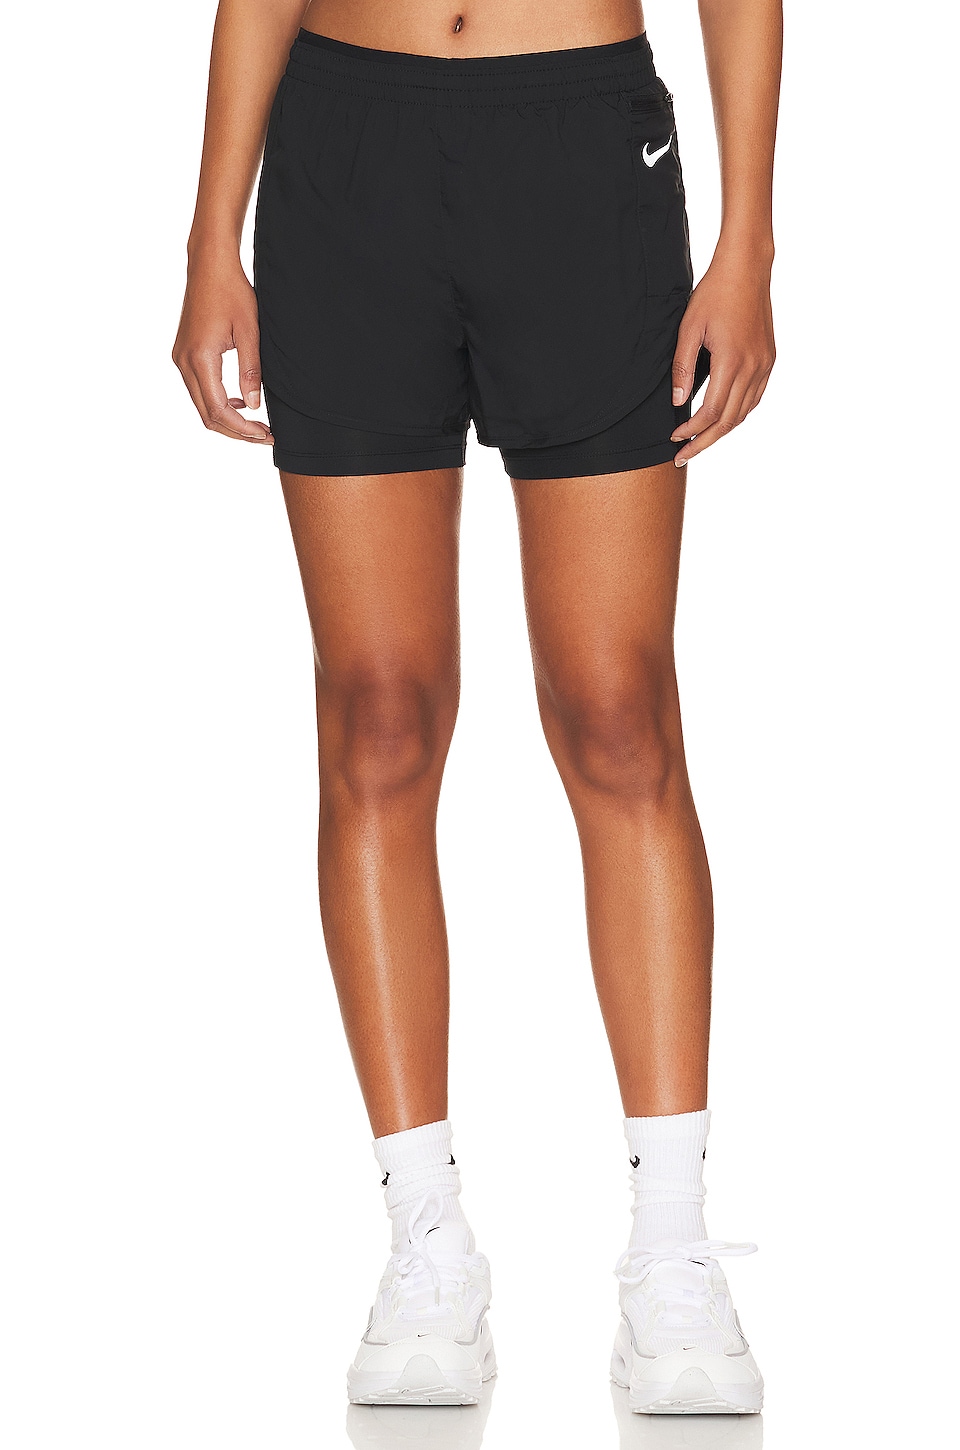 Nike Tempo Luxe 2 in 1 Running Short in Black